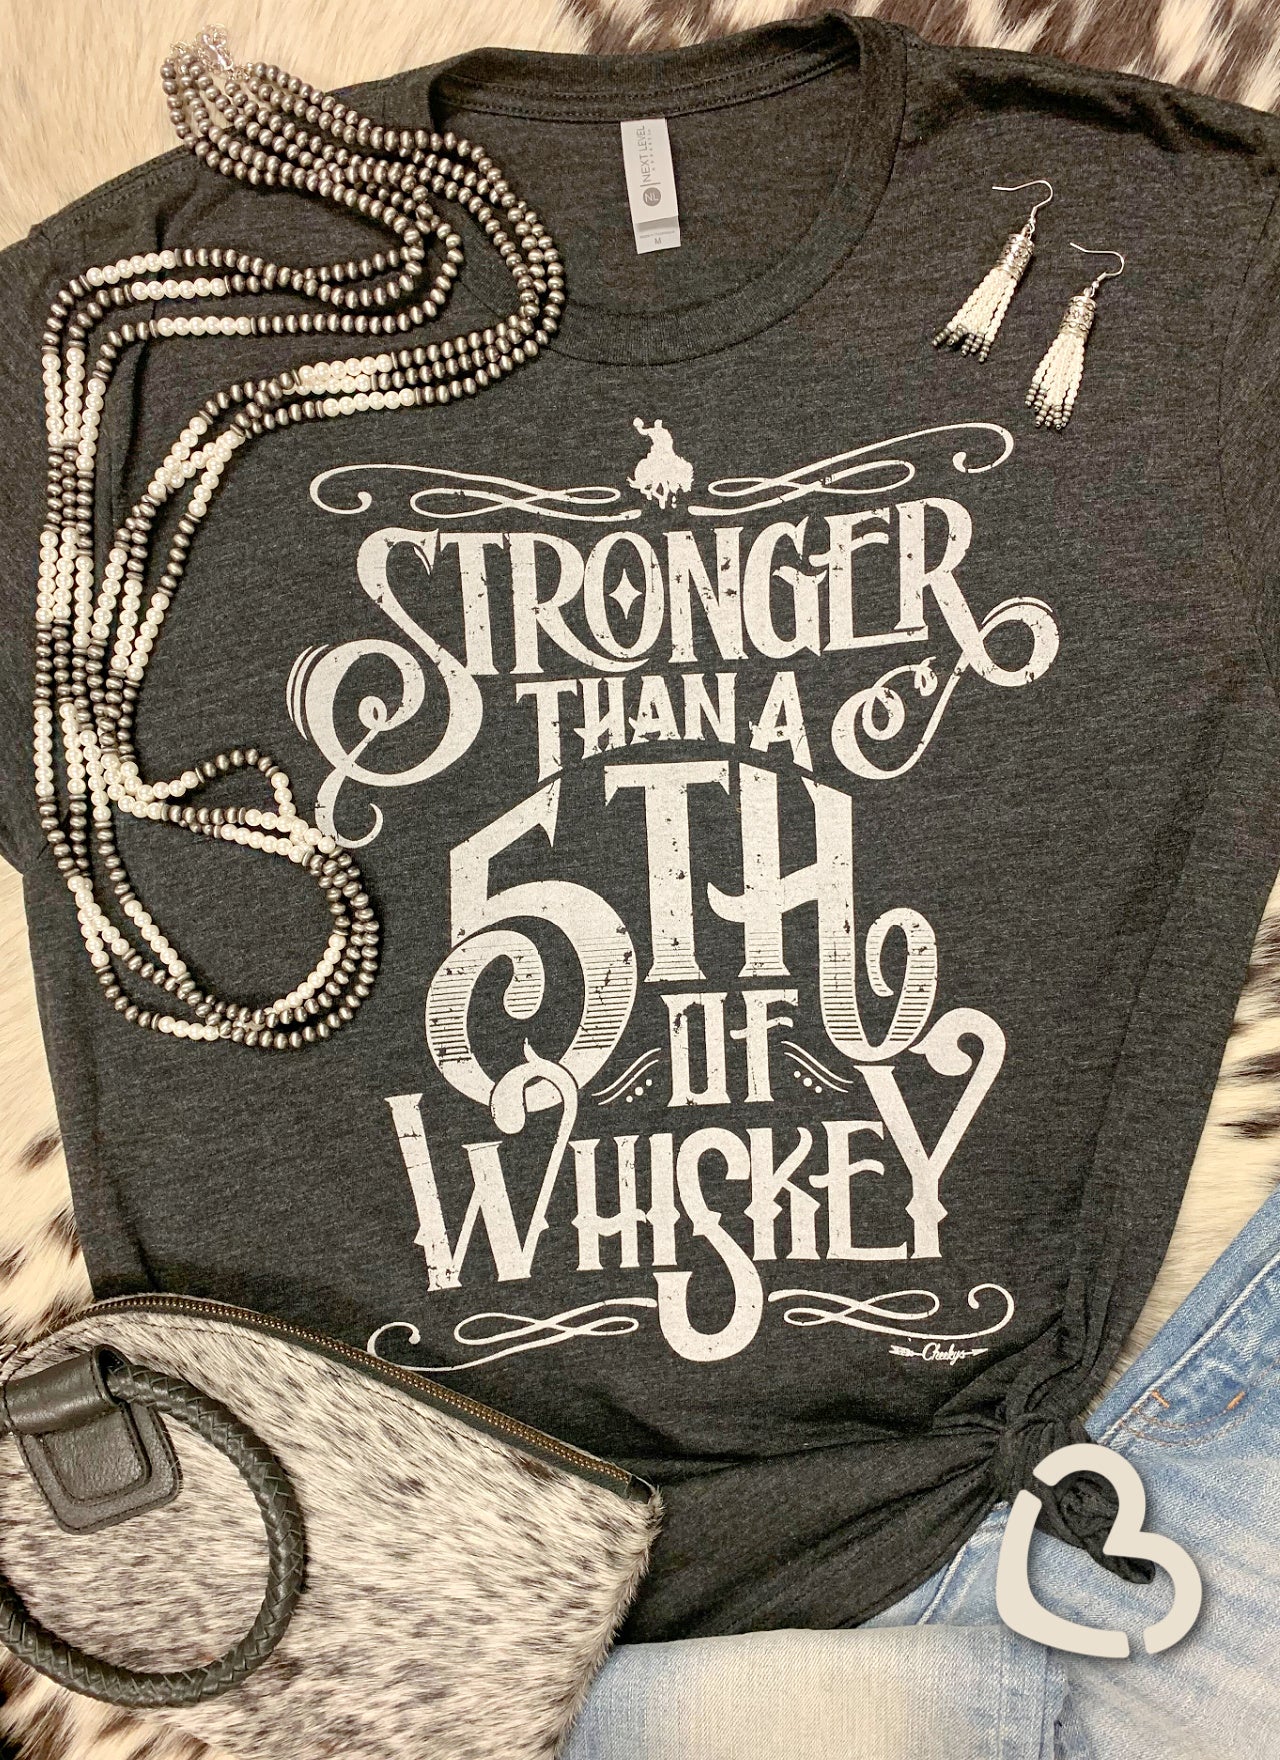 Stronger Than a Fifth of Whiskey on Vintage Black Unisex Tee with Silver Print Cheekys Apparel 38 